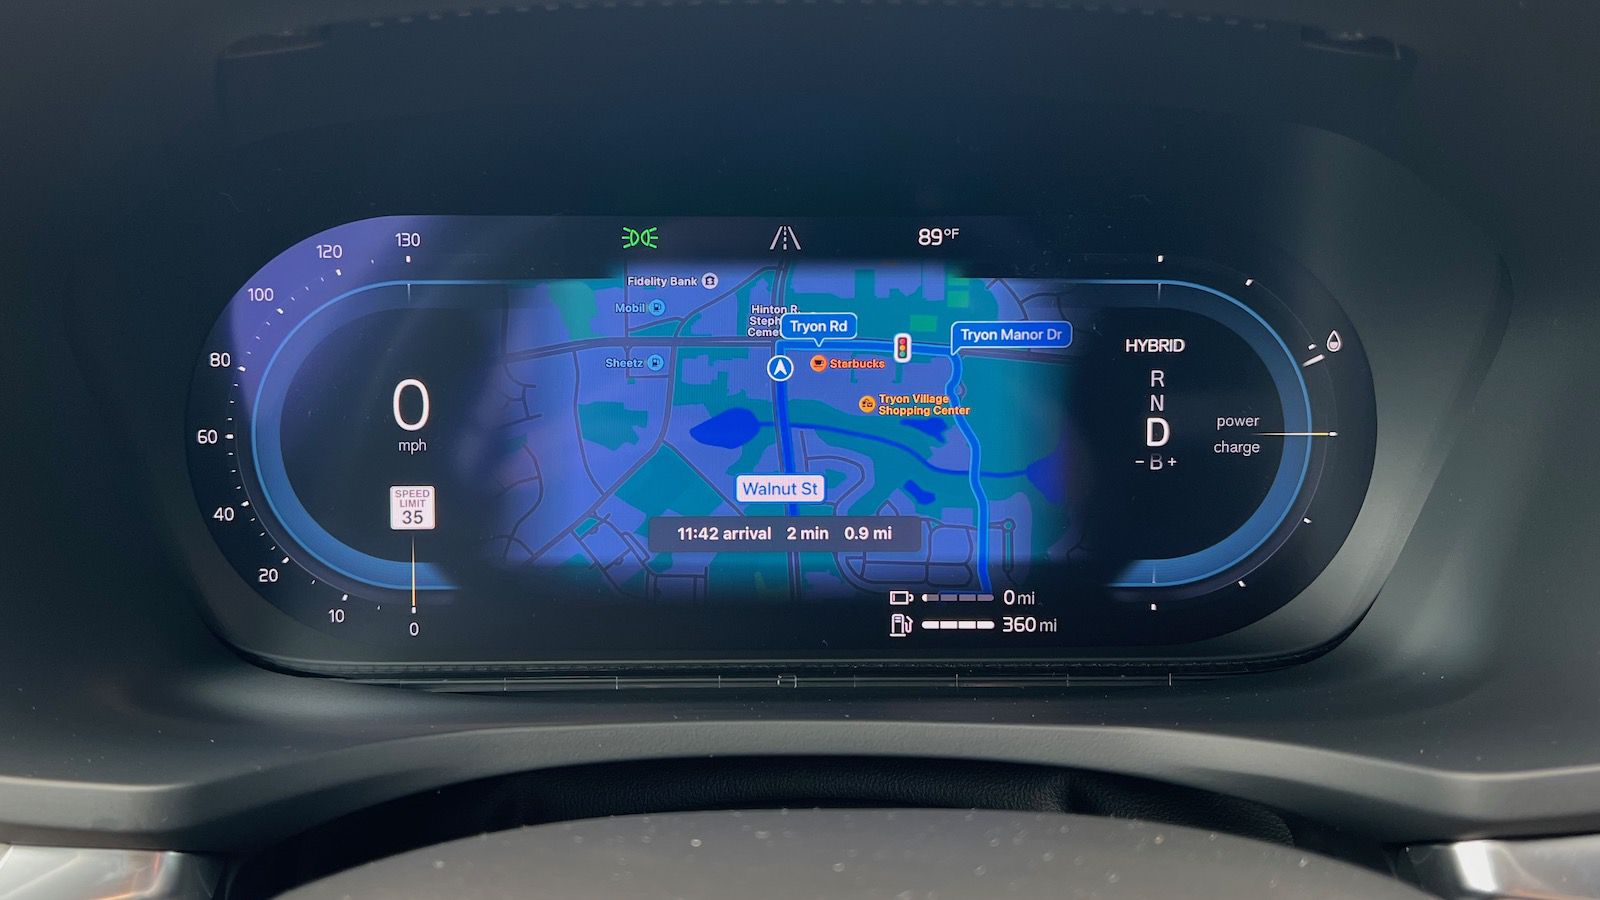 Hands-On With Volvo's Dual-Screen Apple Maps CarPlay Experience